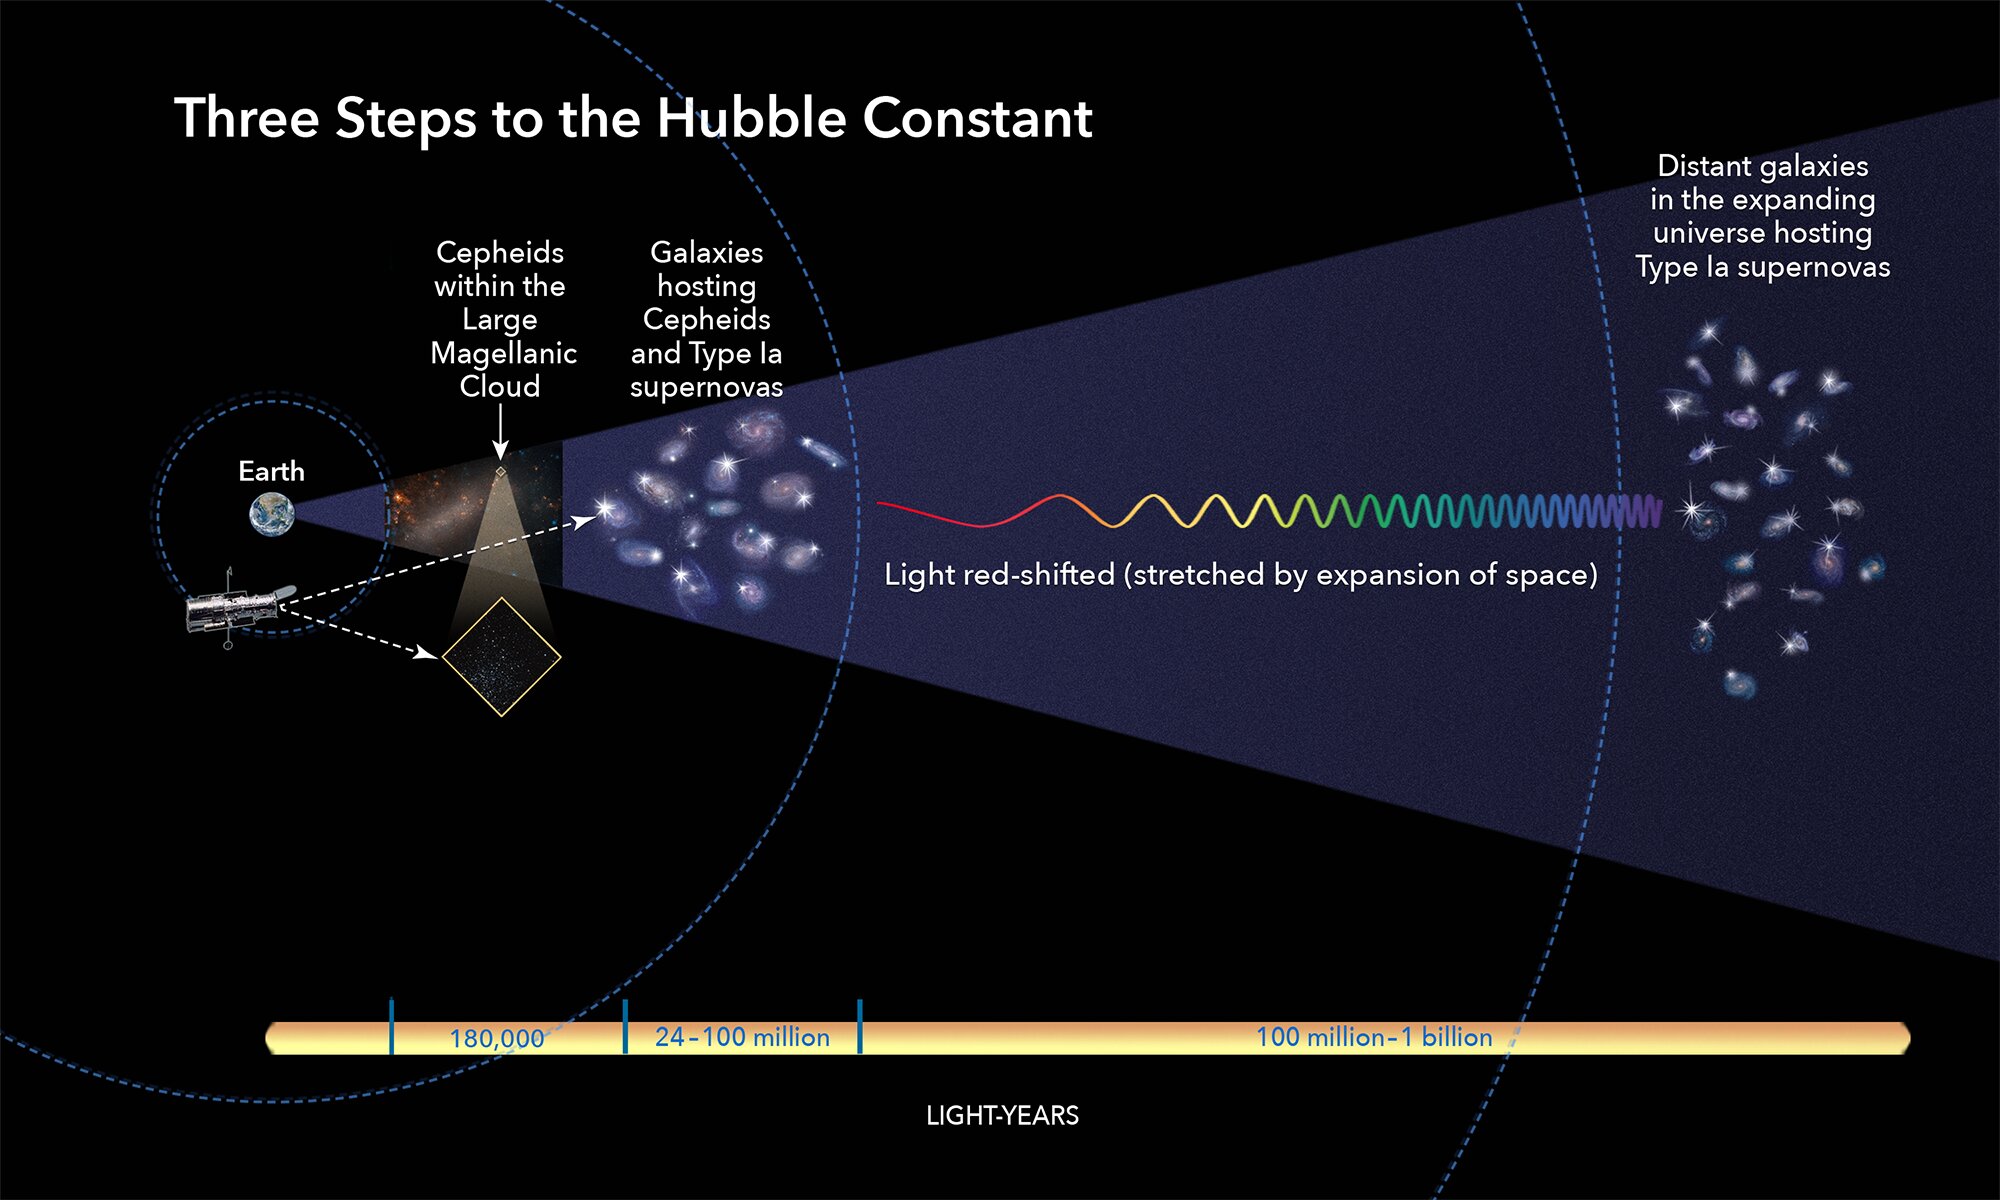 This illustration shows the three basic steps astronomers use to calculate how fast the universe expands over time, a value called the Hubble constant. All the steps involve building a strong "cosmic distance ladder," by starting with measuring accurate distances to nearby galaxies and then moving to galaxies farther and farther away. This "ladder" is a series of measurements of different kinds of astronomical objects with an intrinsic brightness that researchers can use to calculate distances.